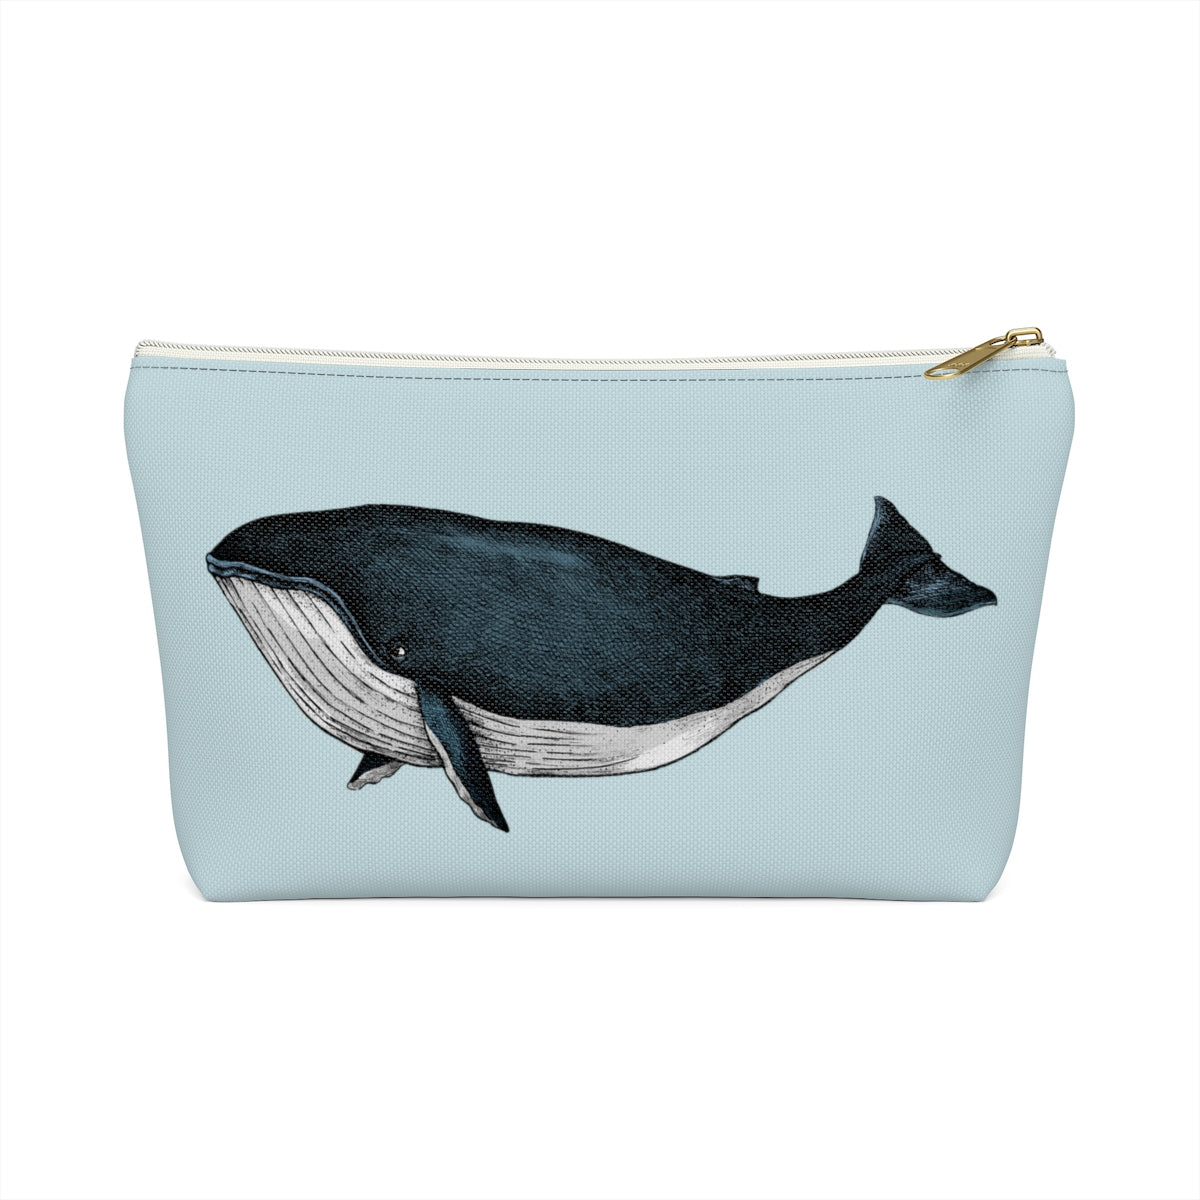 Blue Whale Pouch Bag, Canvas Beach Travel Wash Makeup Toiletry Bag Ocean Small Large Bath Organizer Cosmetic Gift Accessory Zipper Pouch Starcove Fashion